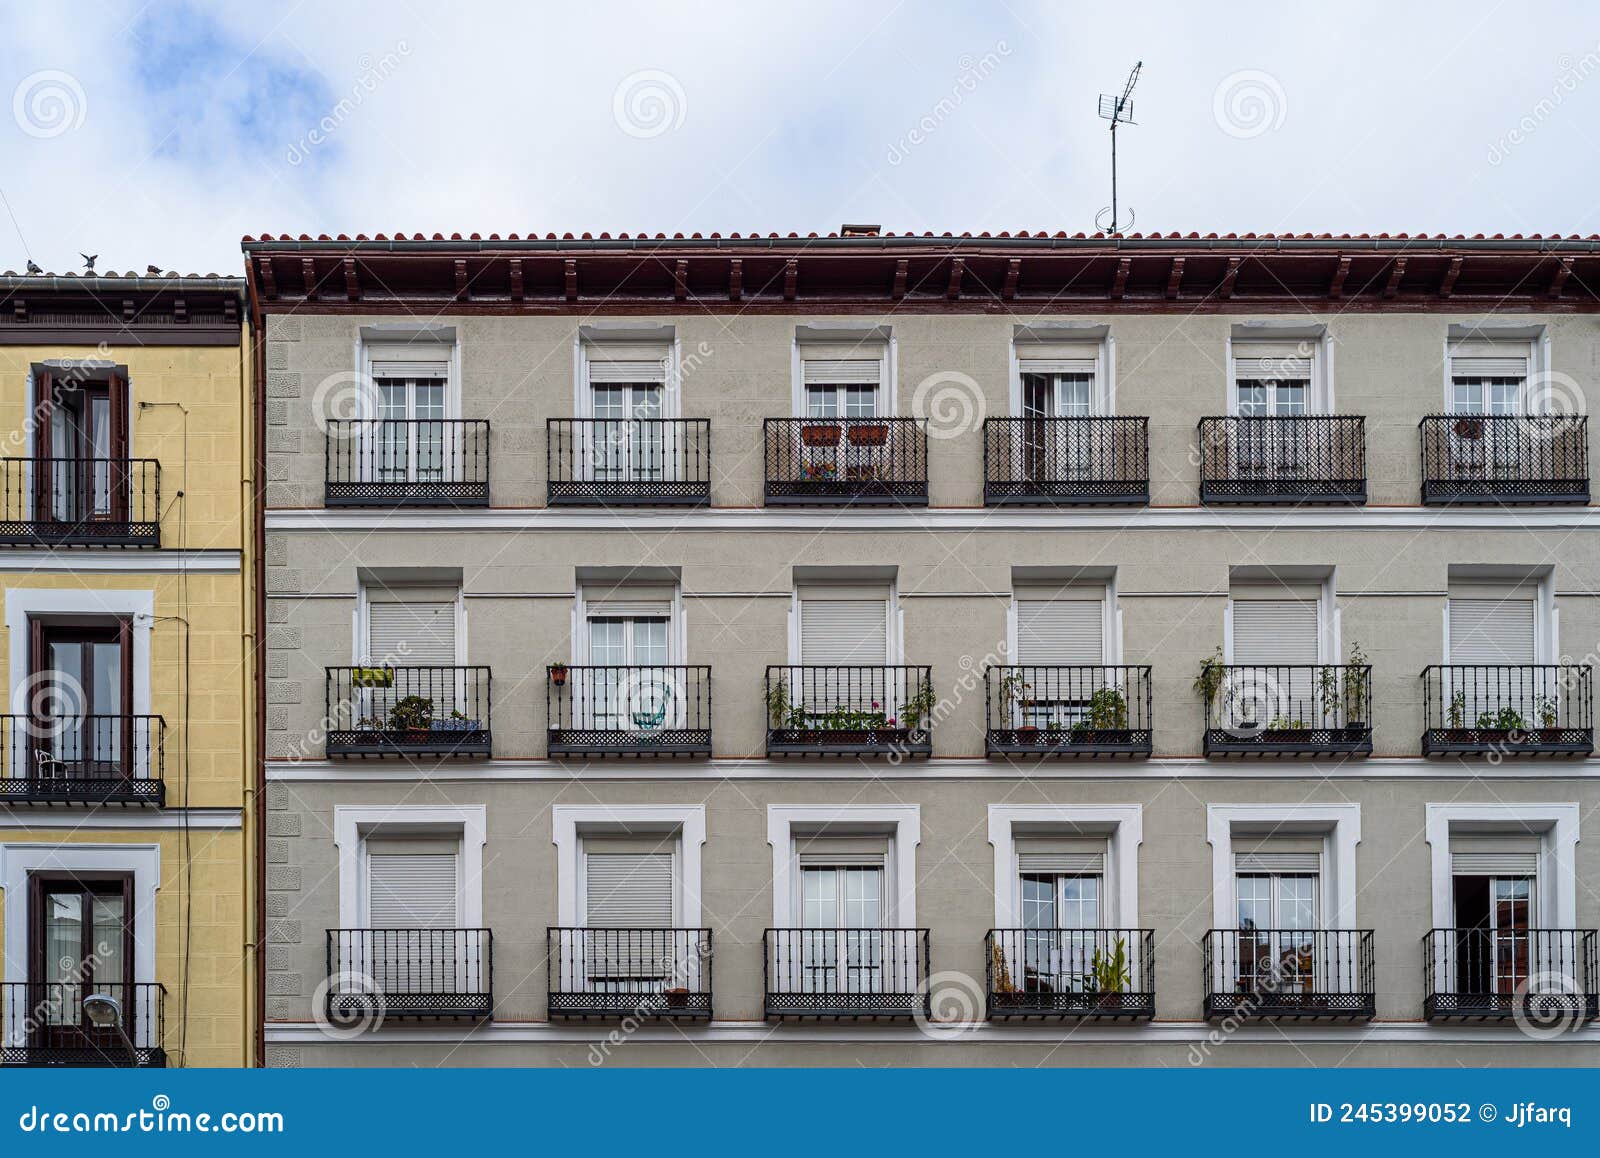 low angle view of old residential buildings in lavapies quarter in central madrid